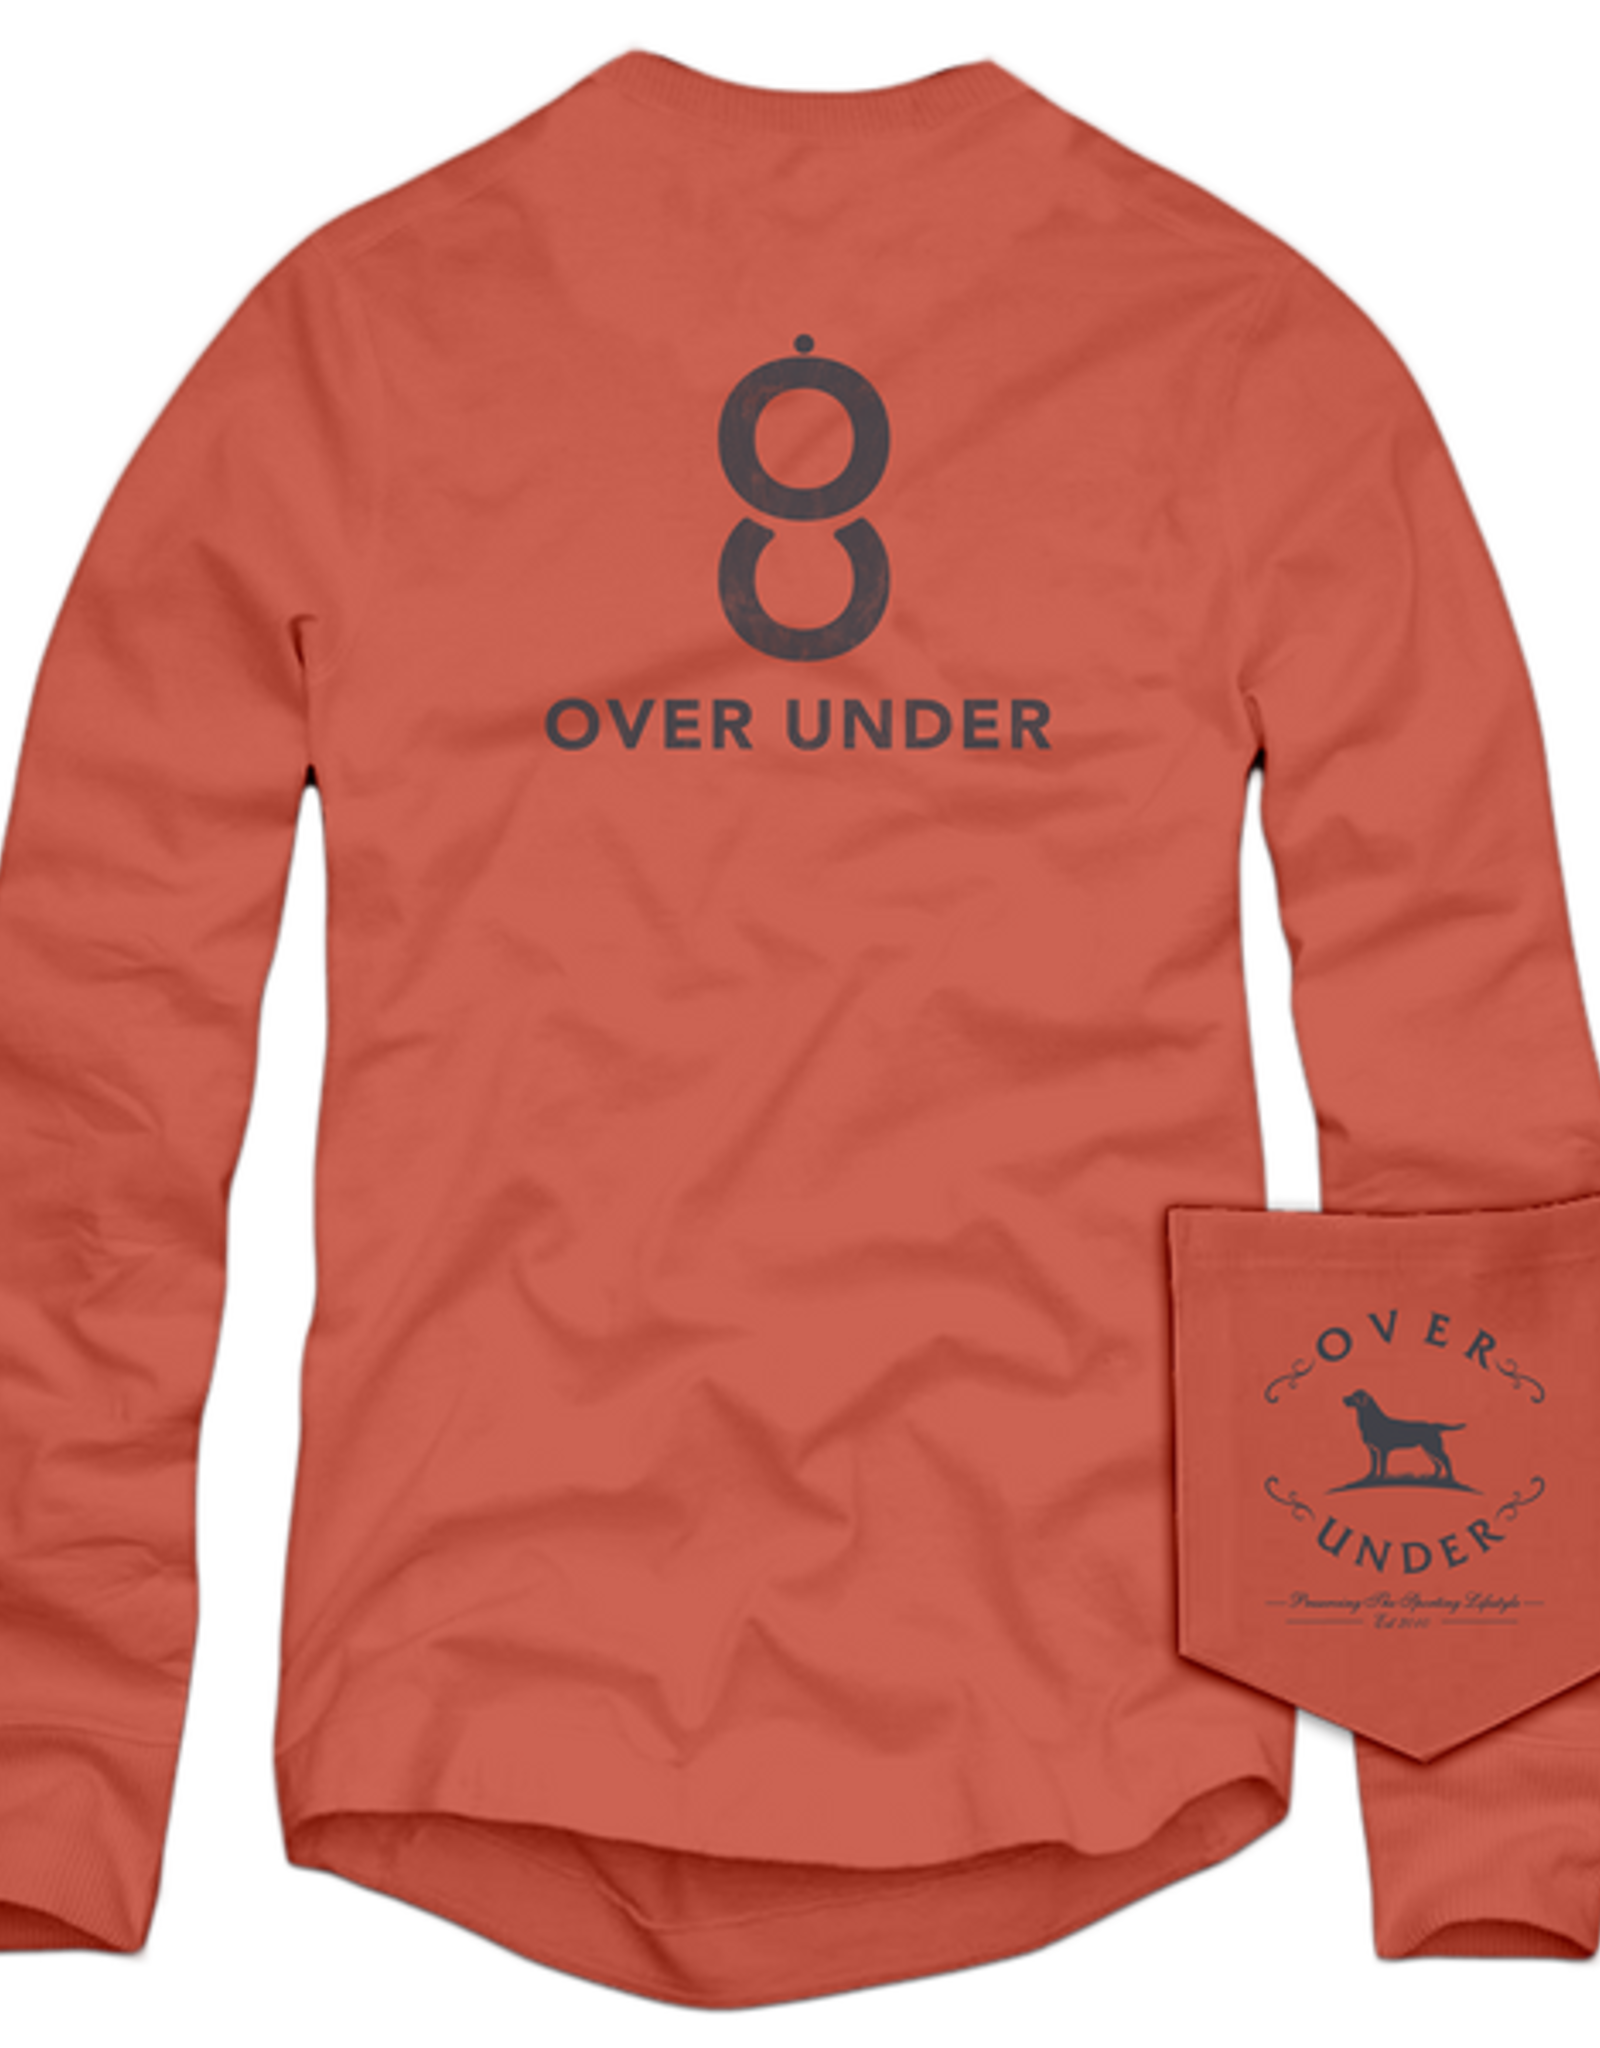 Over Under Clothing Double Barrel T-Shirt LS